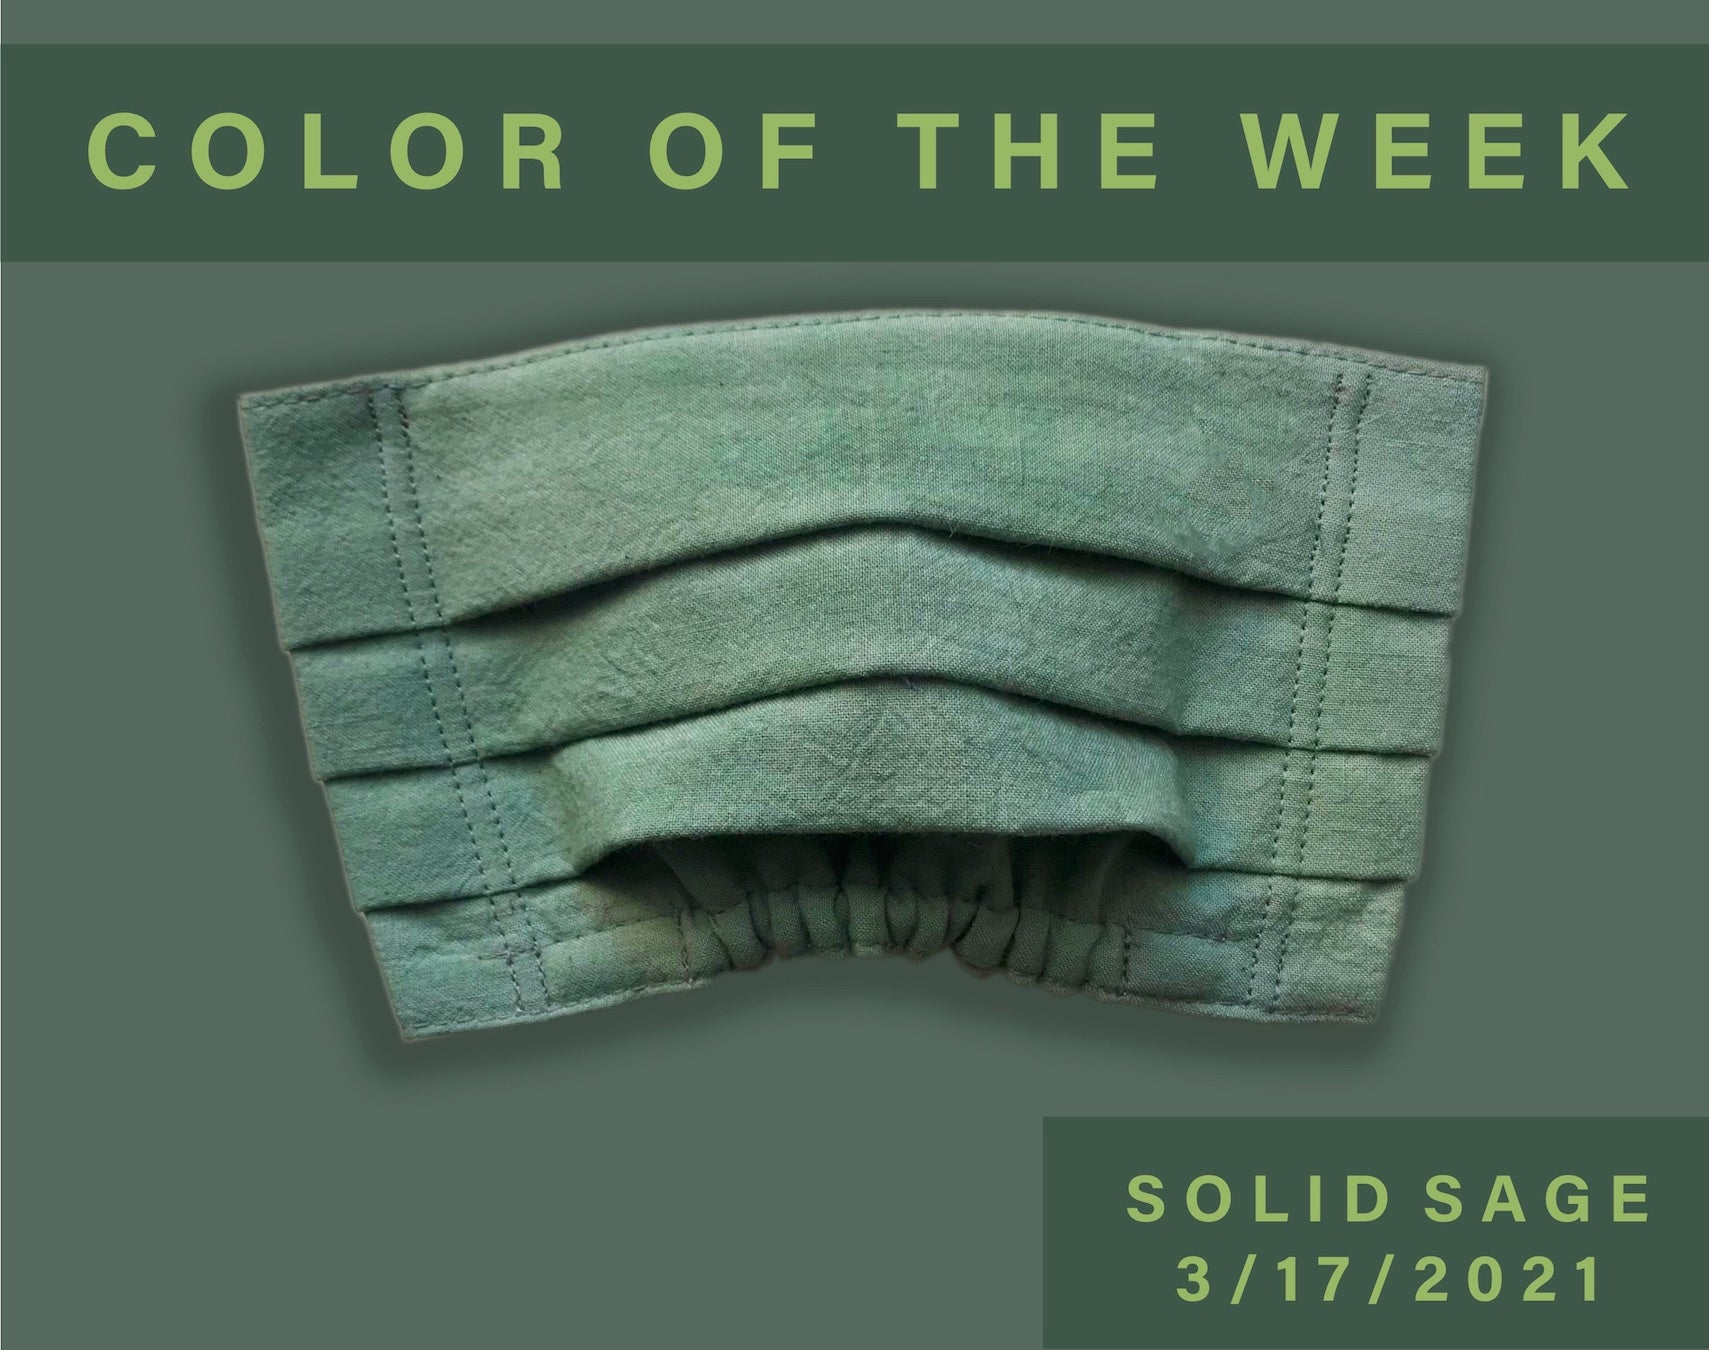 COLOR OF THE WEEK!